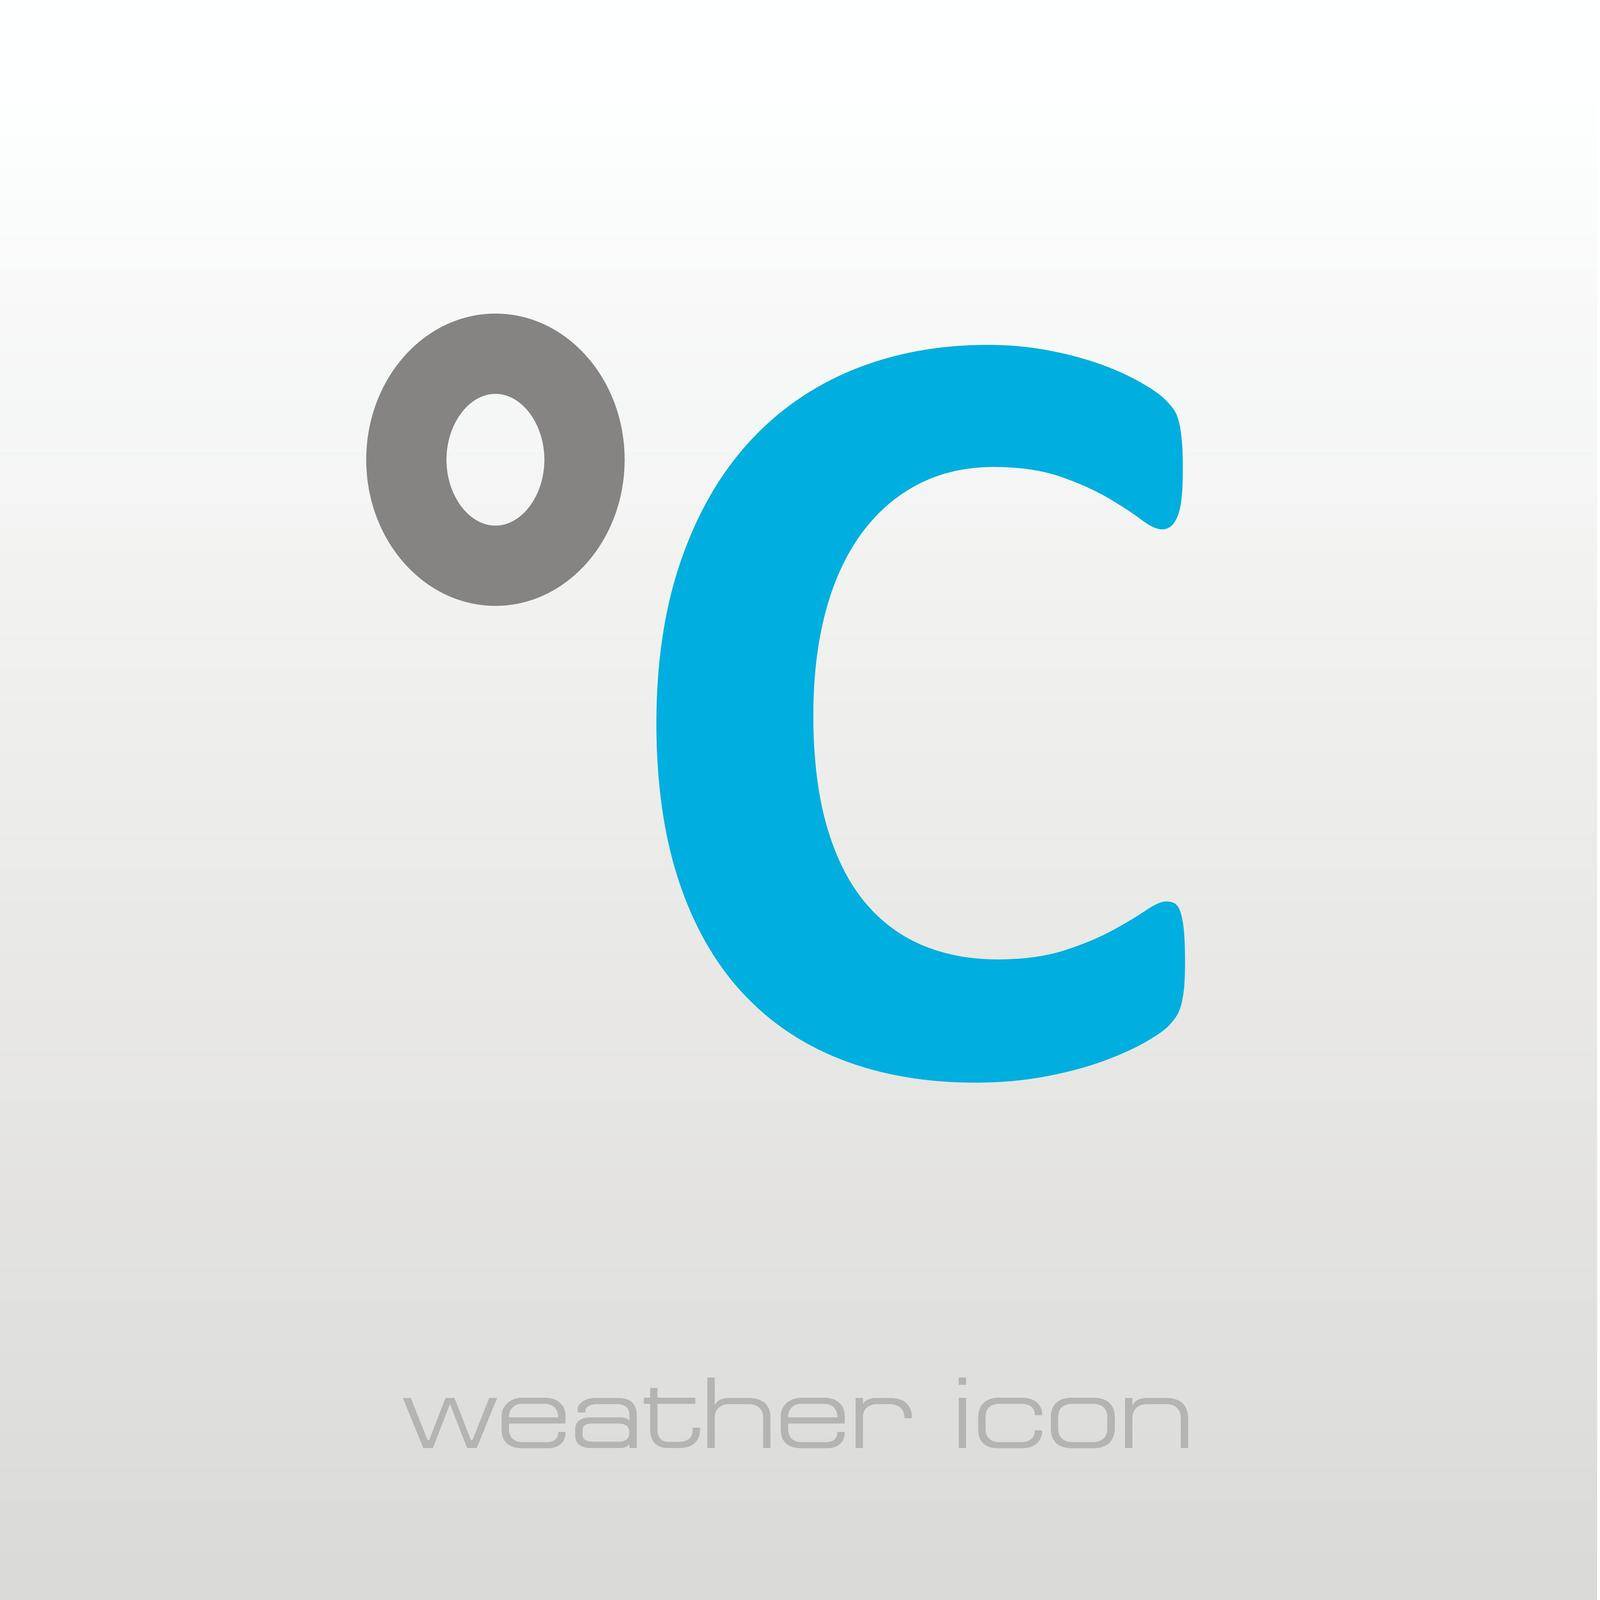 Degrees Celsius outline icon. Meteorology. Weather. Vector illustration eps 10